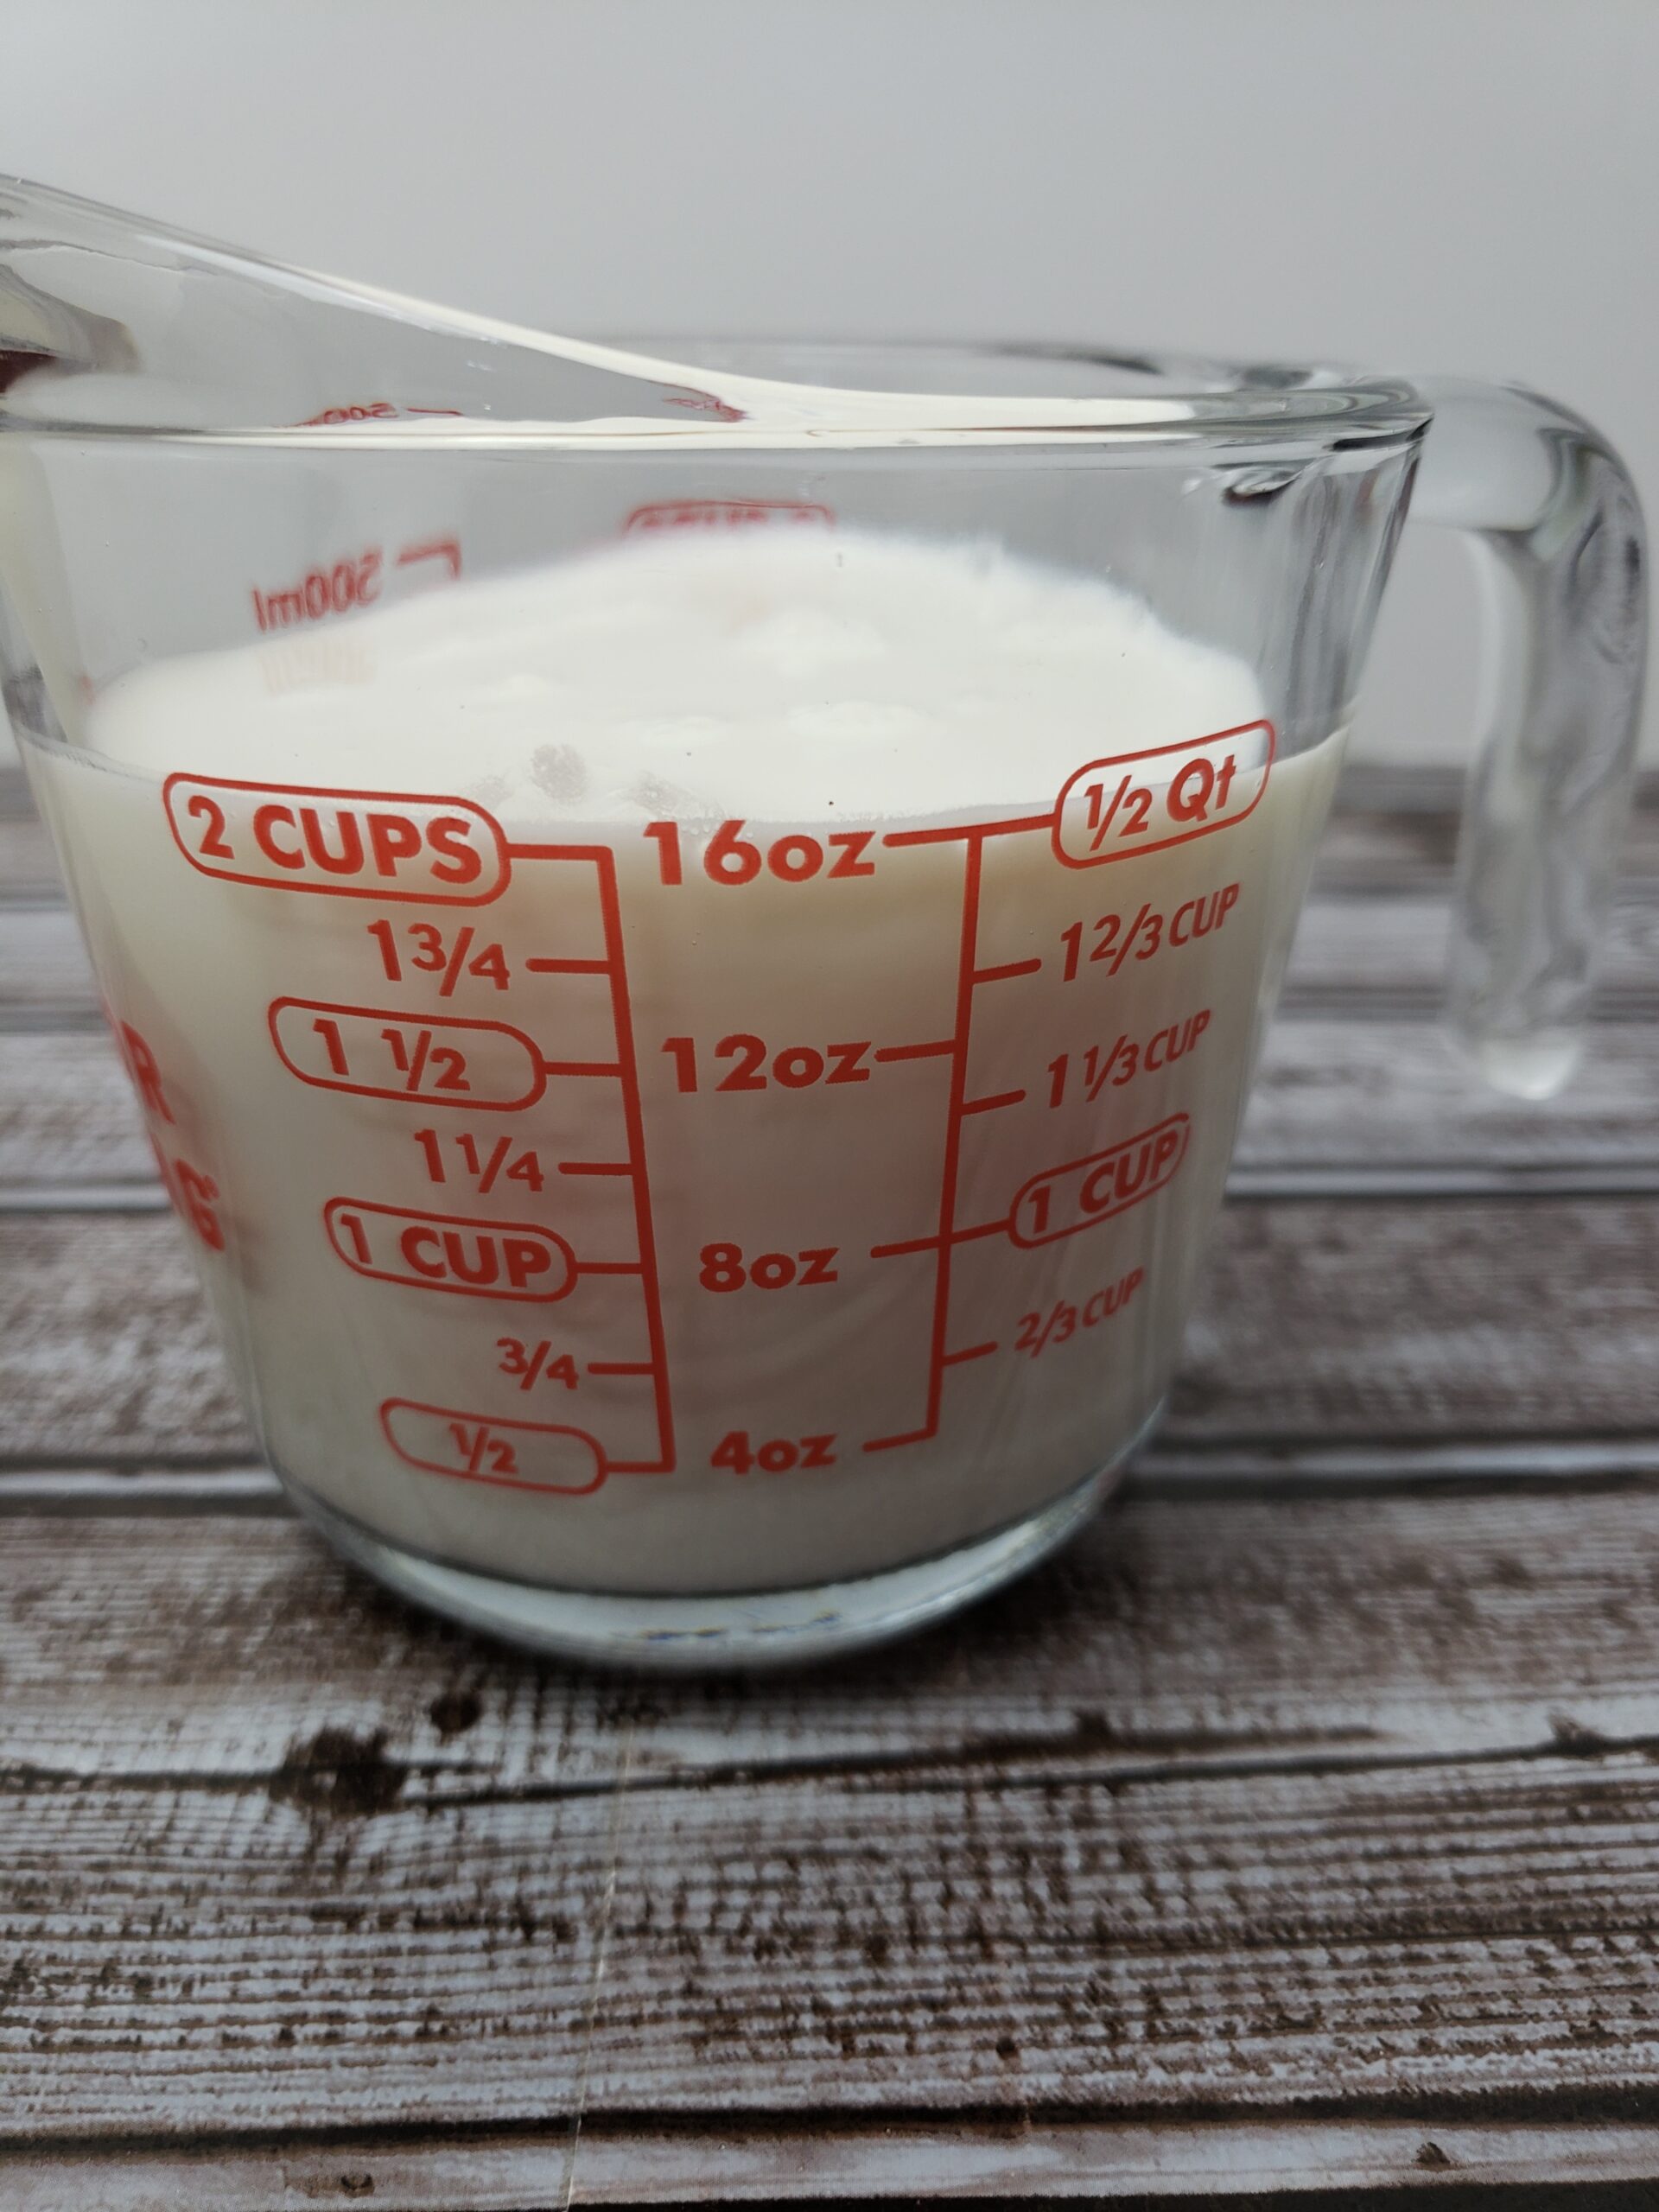 Buttermilk in 2 cup measuring cup.